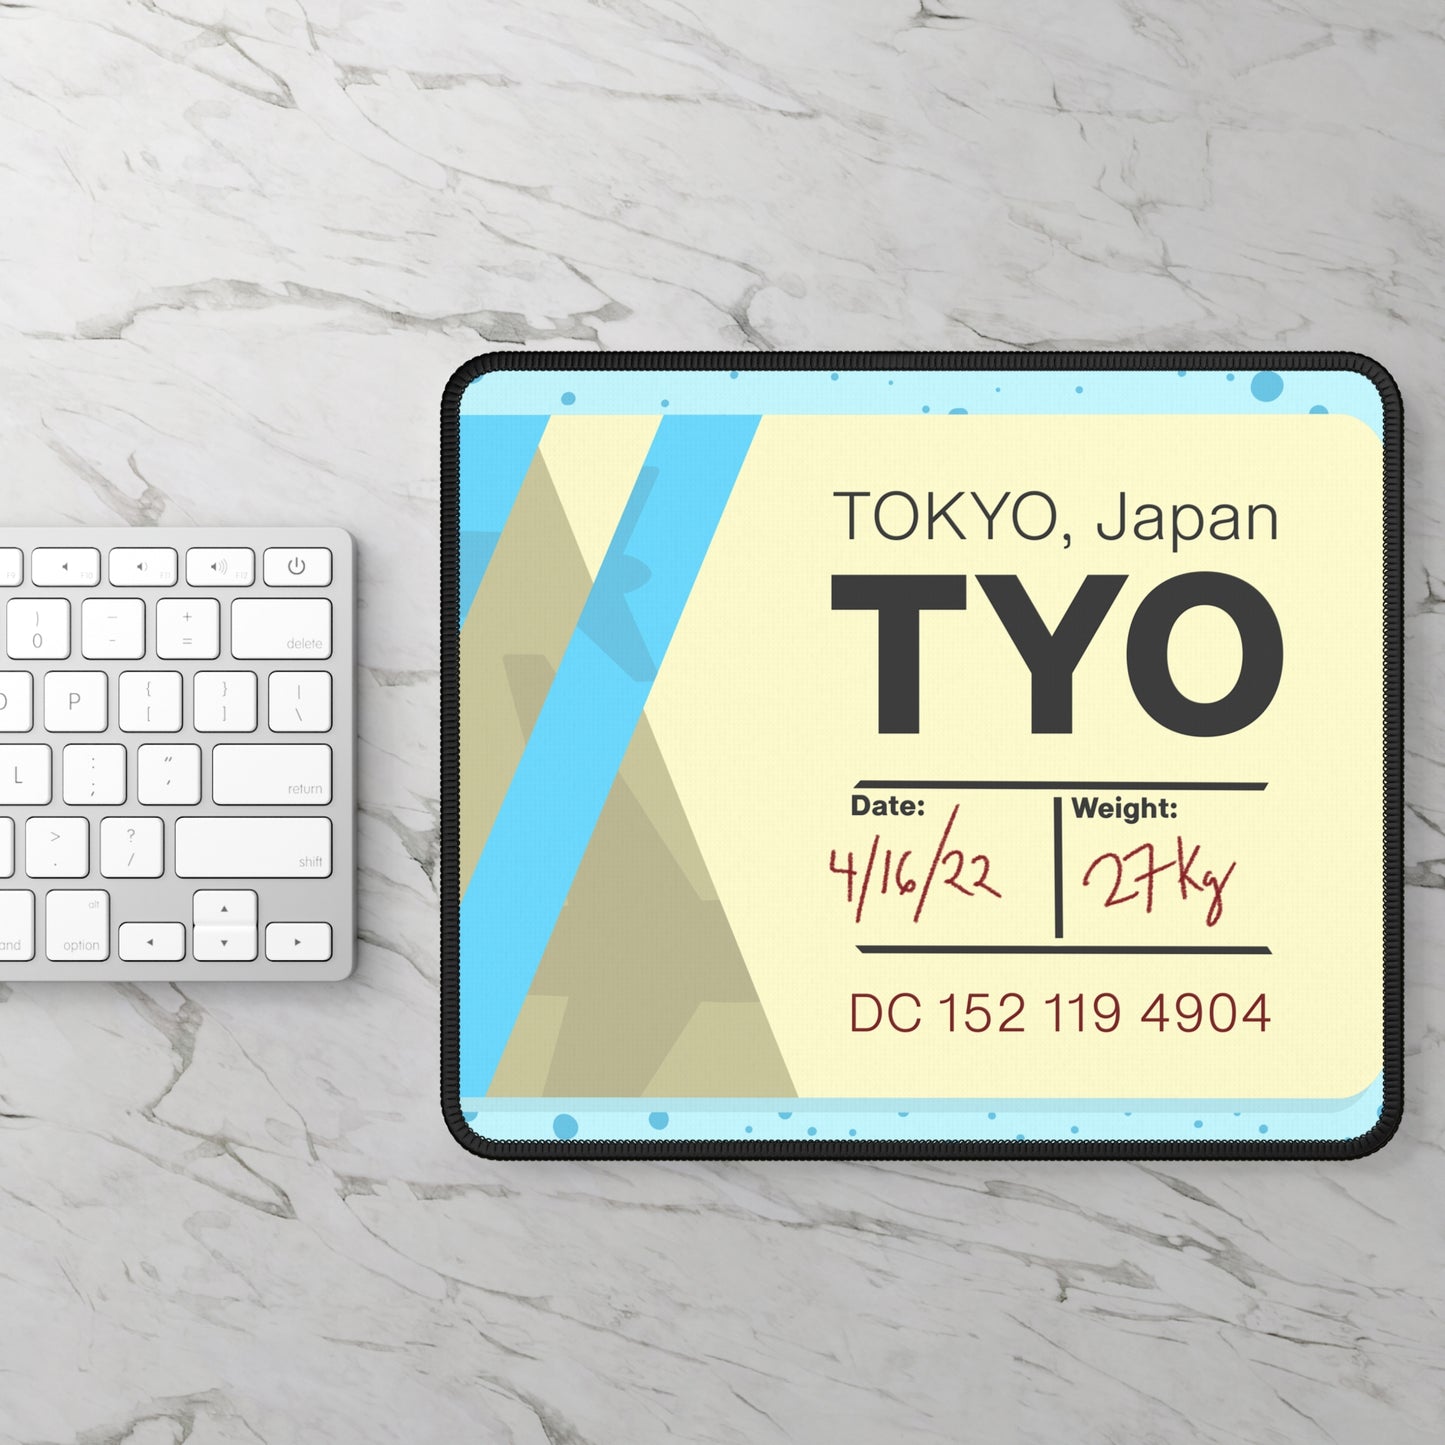 A gaming mouse pad with a dotted blue background and a blue and yellow Tokyo airline baggage tag on it sitting next to a keyboard.